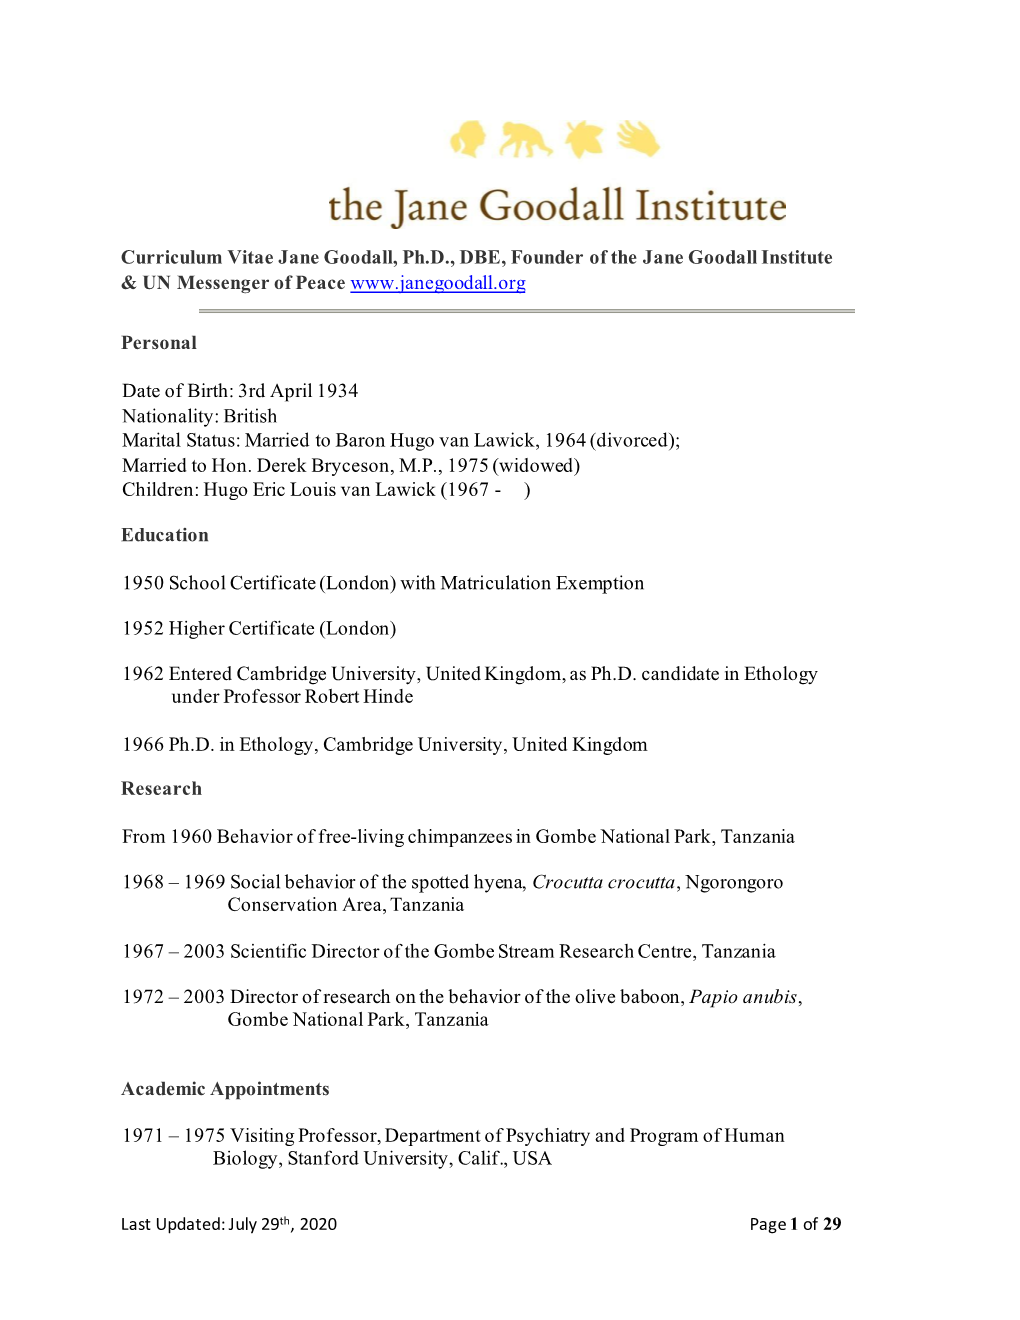 Curriculum Vitae Jane Goodall, Ph.D., DBE, Founder of the Jane Goodall Institute & UN Messenger of Peace